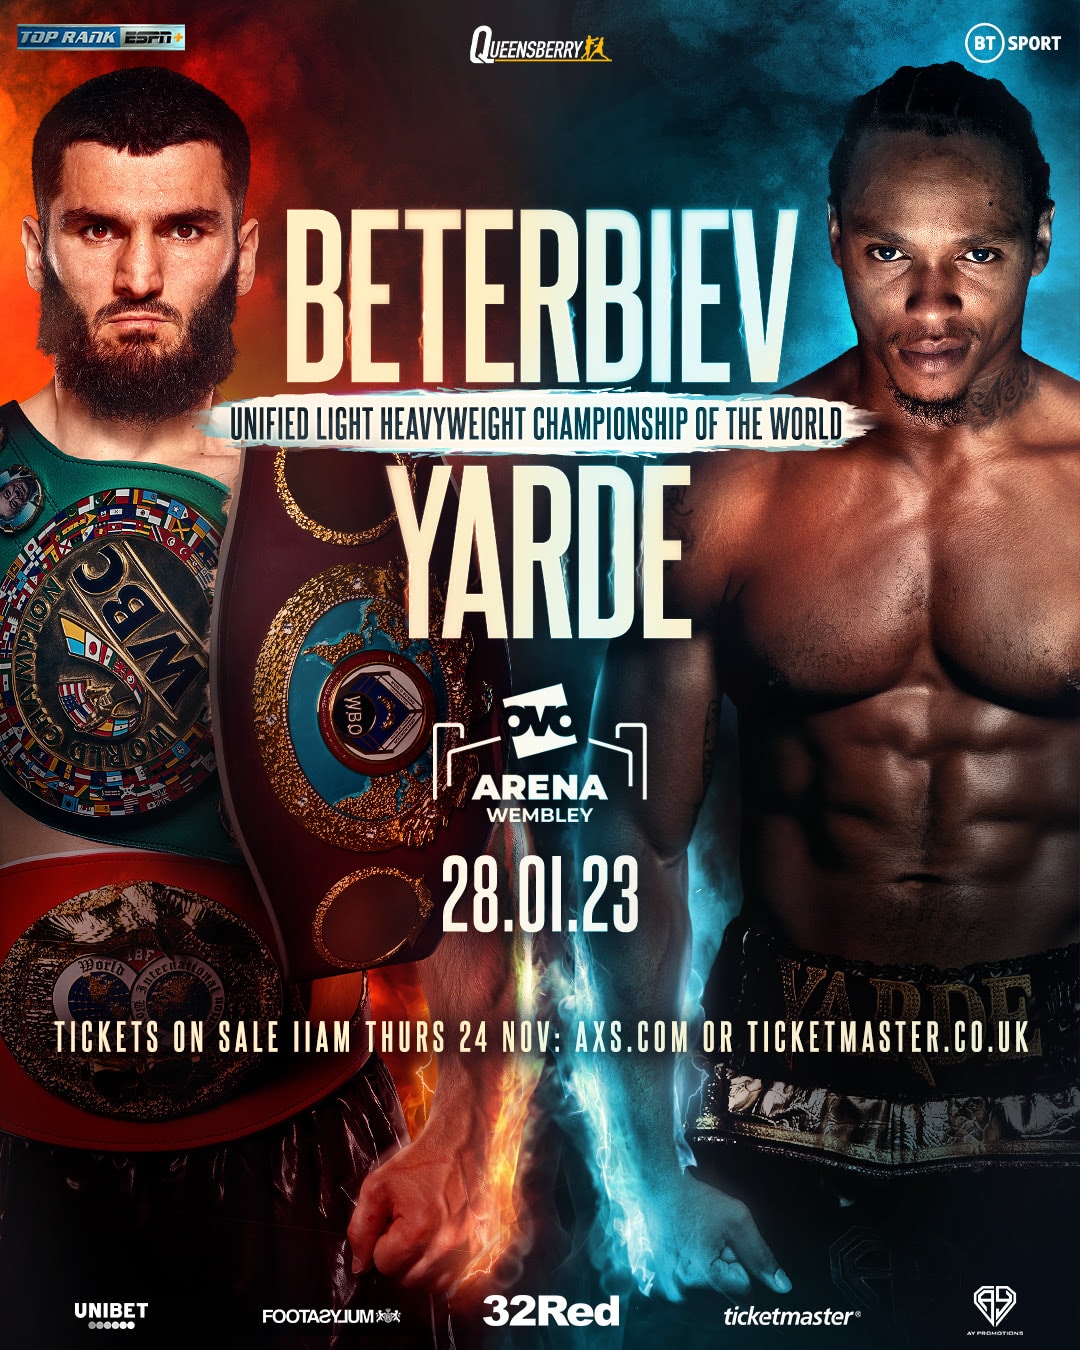 Image: Anthony Yarde intends on slugging with Artur Beterbiev on Jan.28th